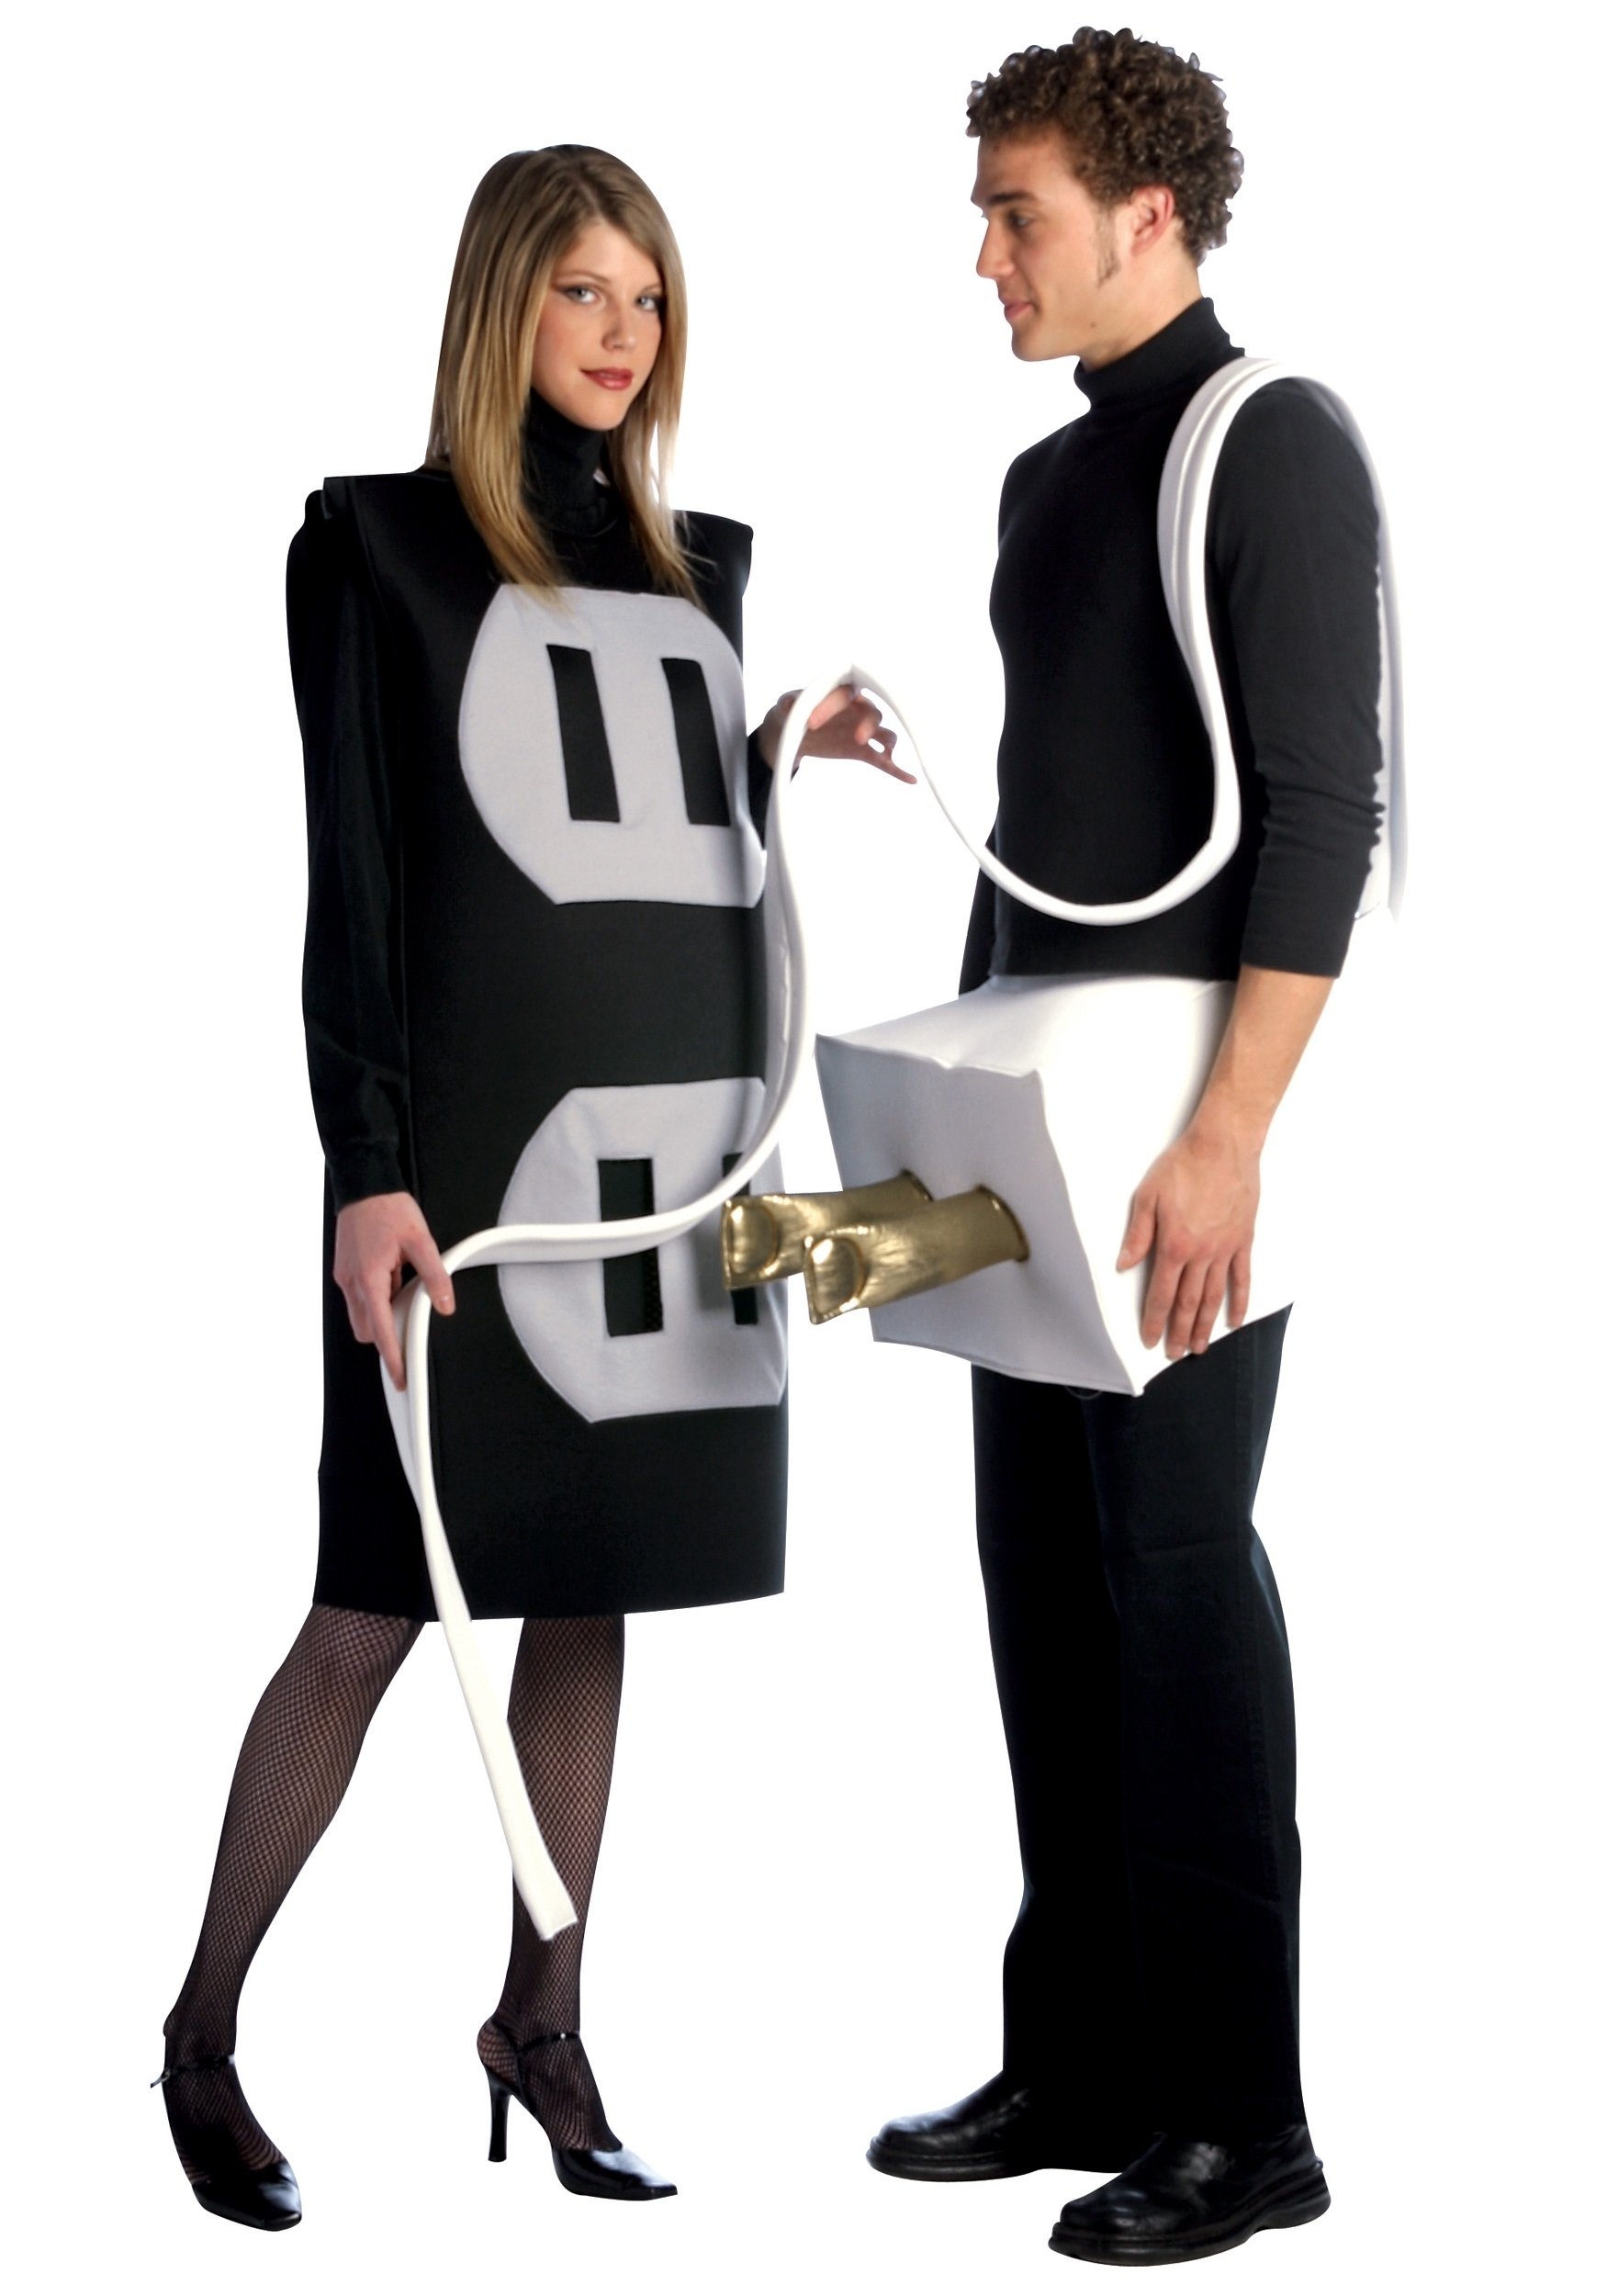 10 Awesome Funny Couple Halloween Costume Ideas plug and socket costume funny couples costume ideas 4 2023